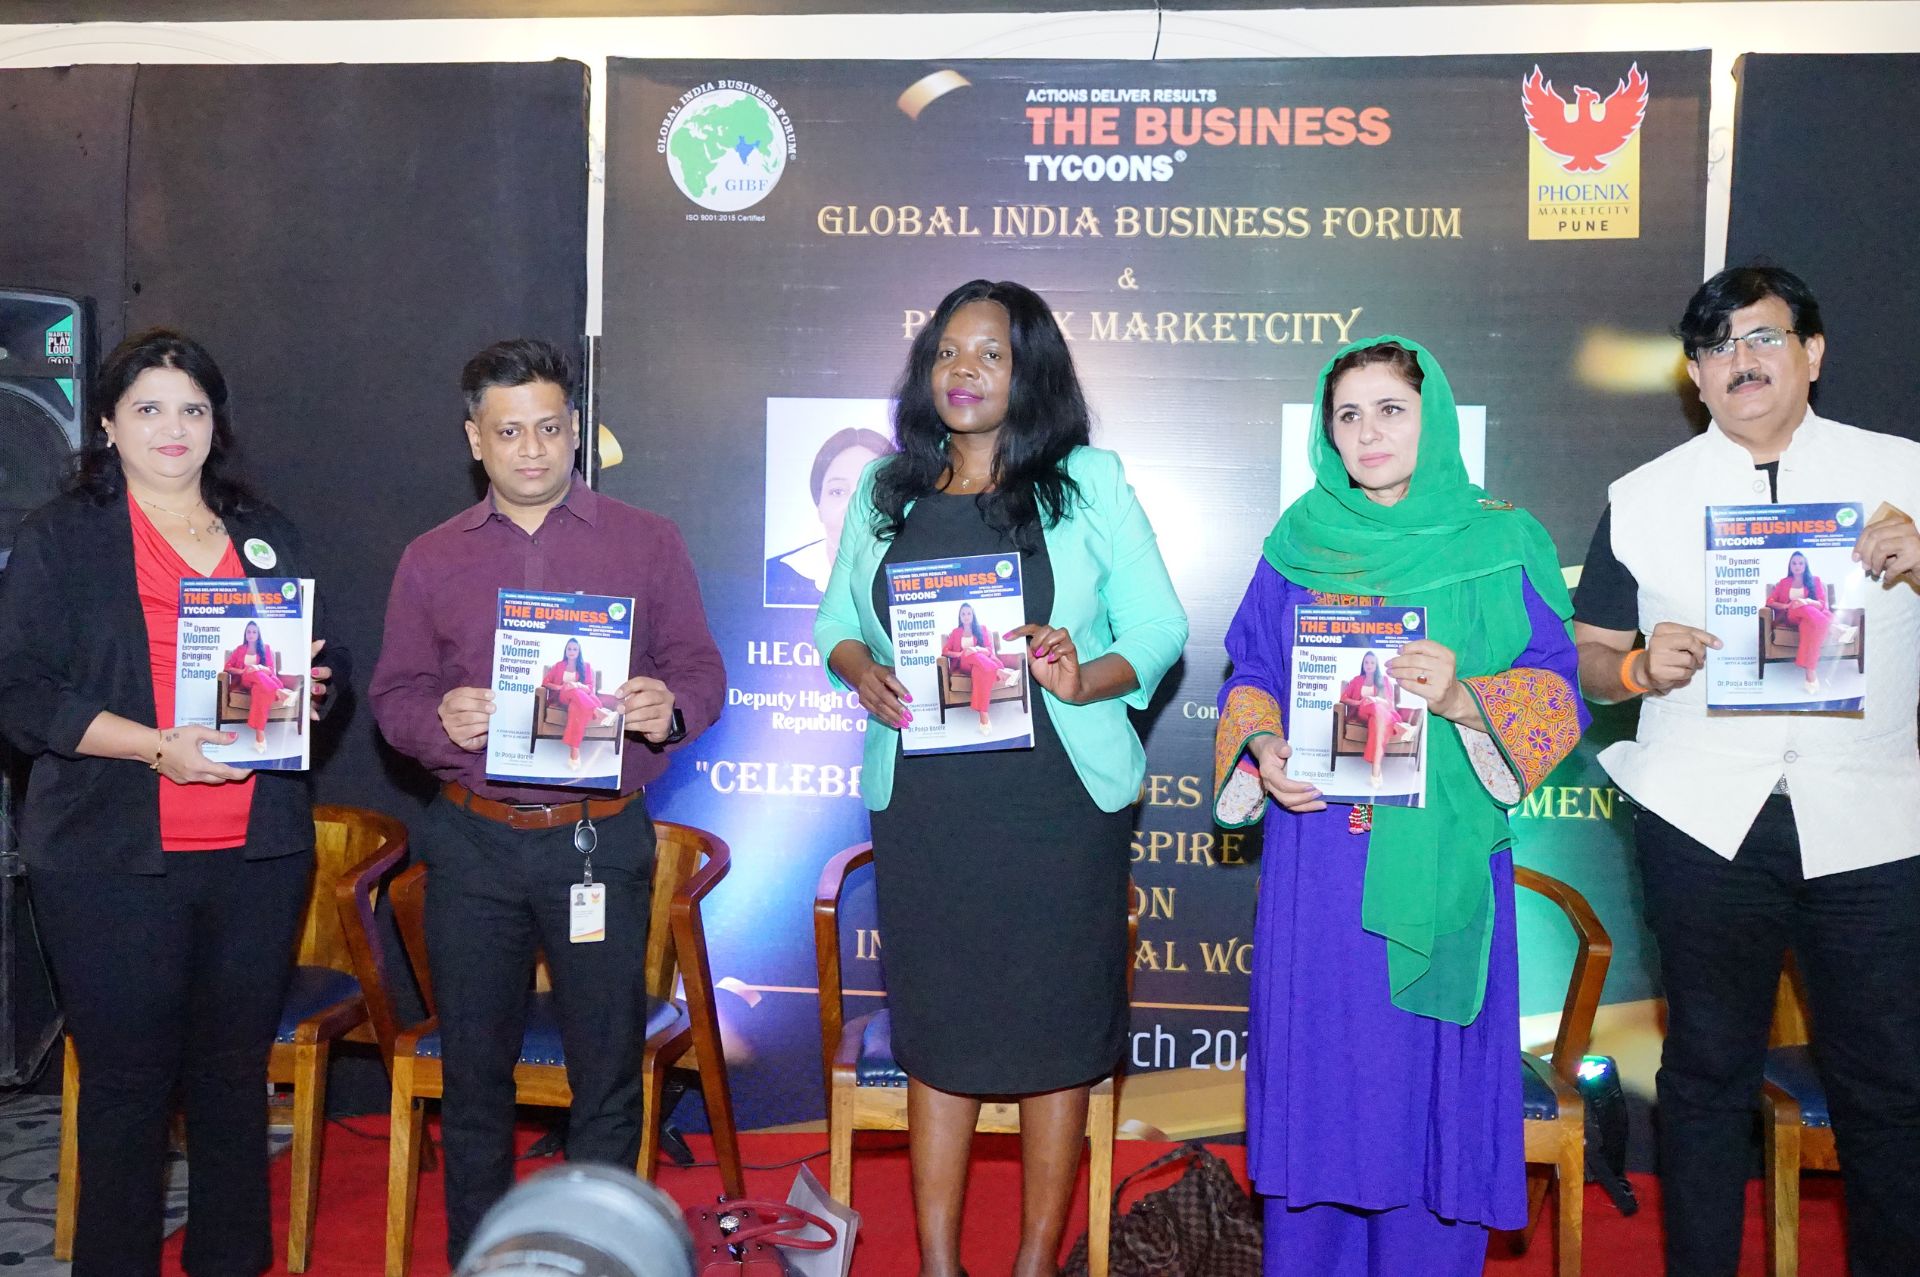 Inauguration of The Business Tycoons Magazine in  The Dynamic Women Entrepreneurs Bringing About a Change